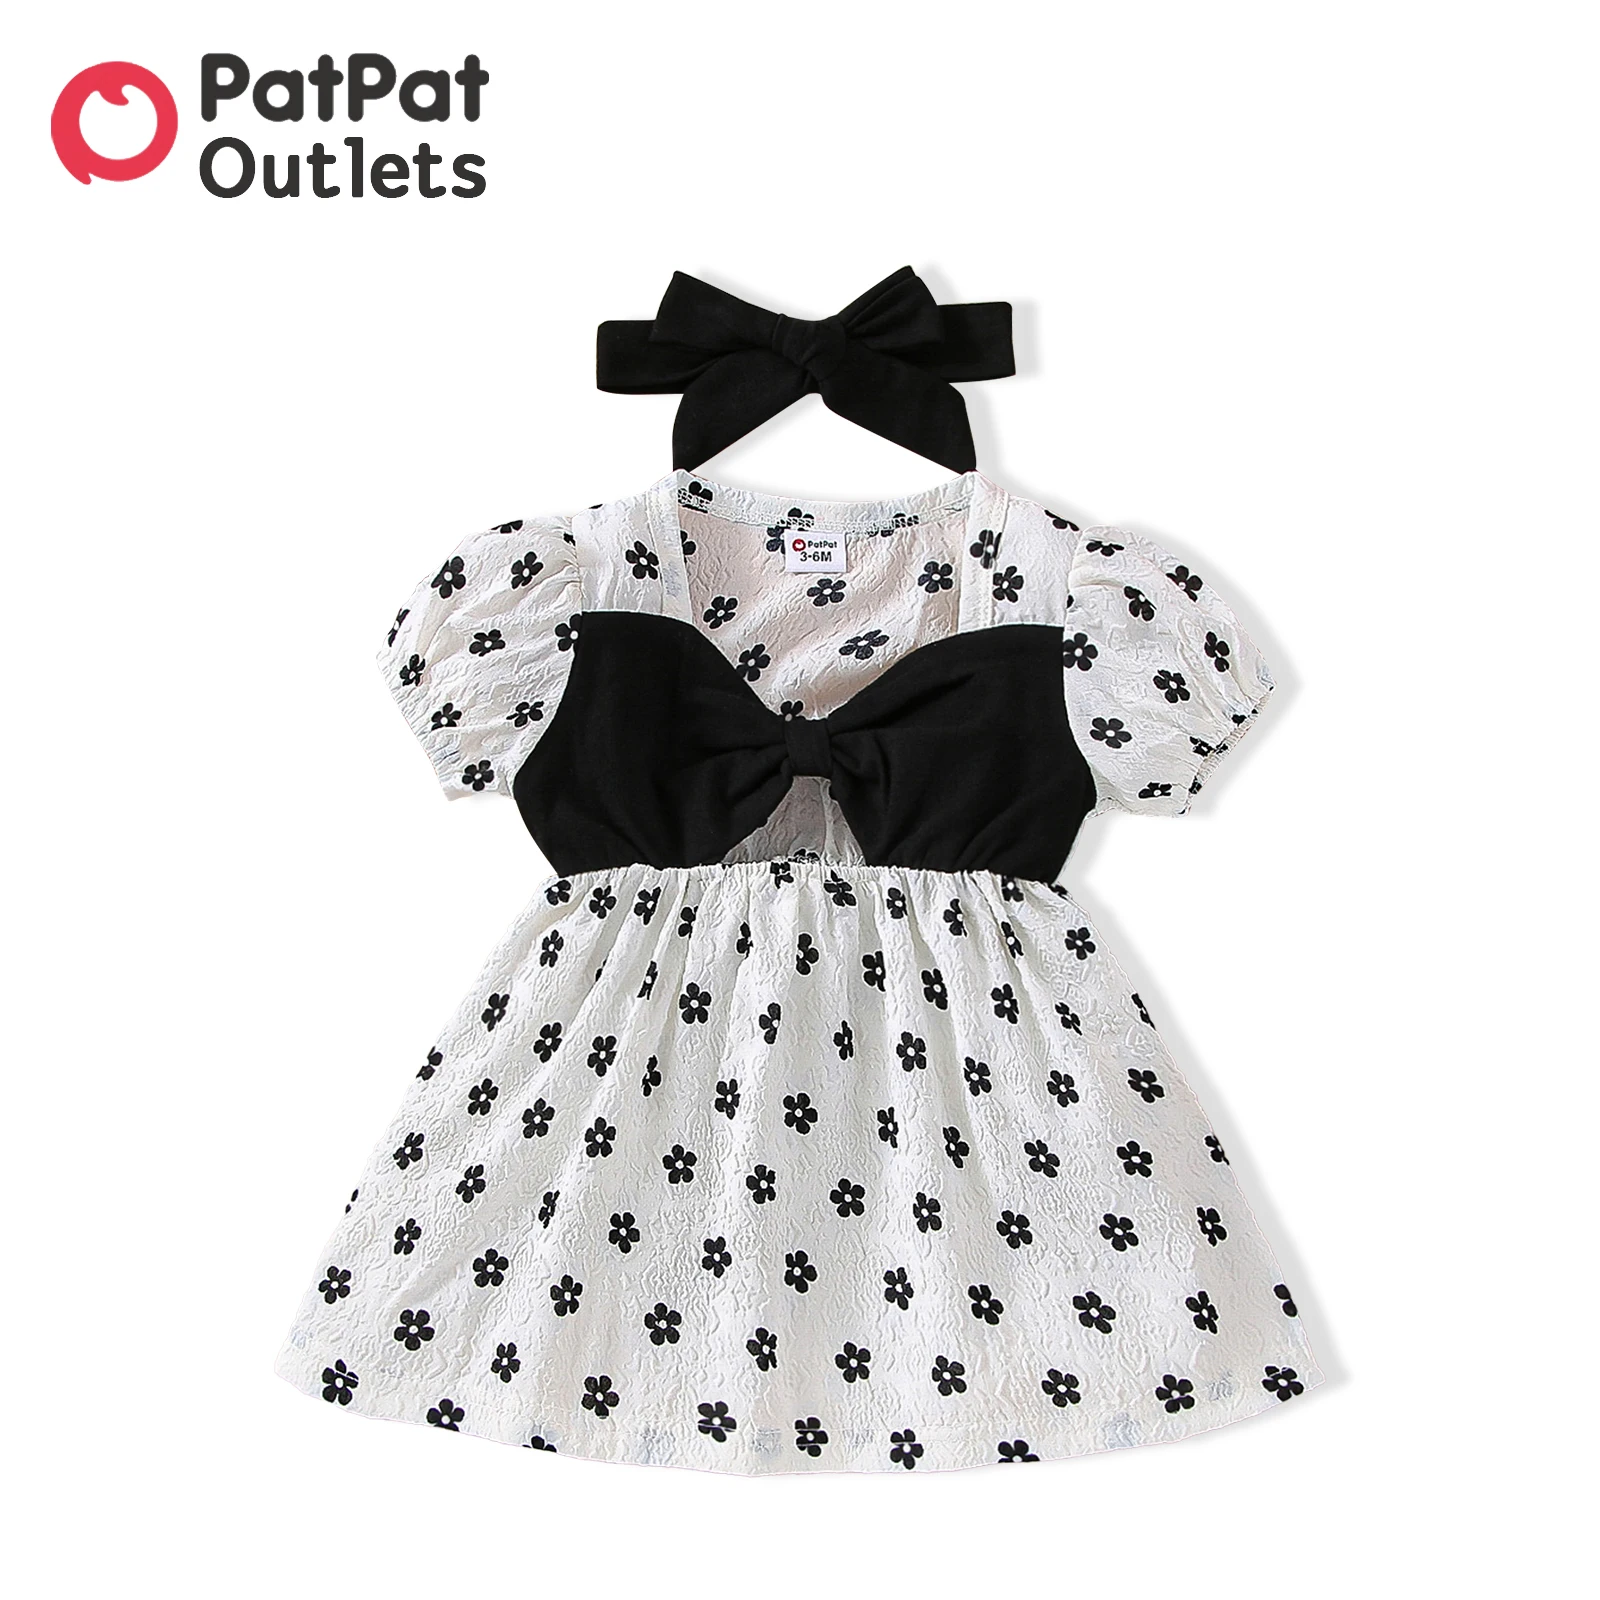 

PatPat 100% Cotton 2pcs Summer Baby Girl Clothes Allover Floral Print Puff-sleeve Bow Front Cut Out Textured Dress Headband Set